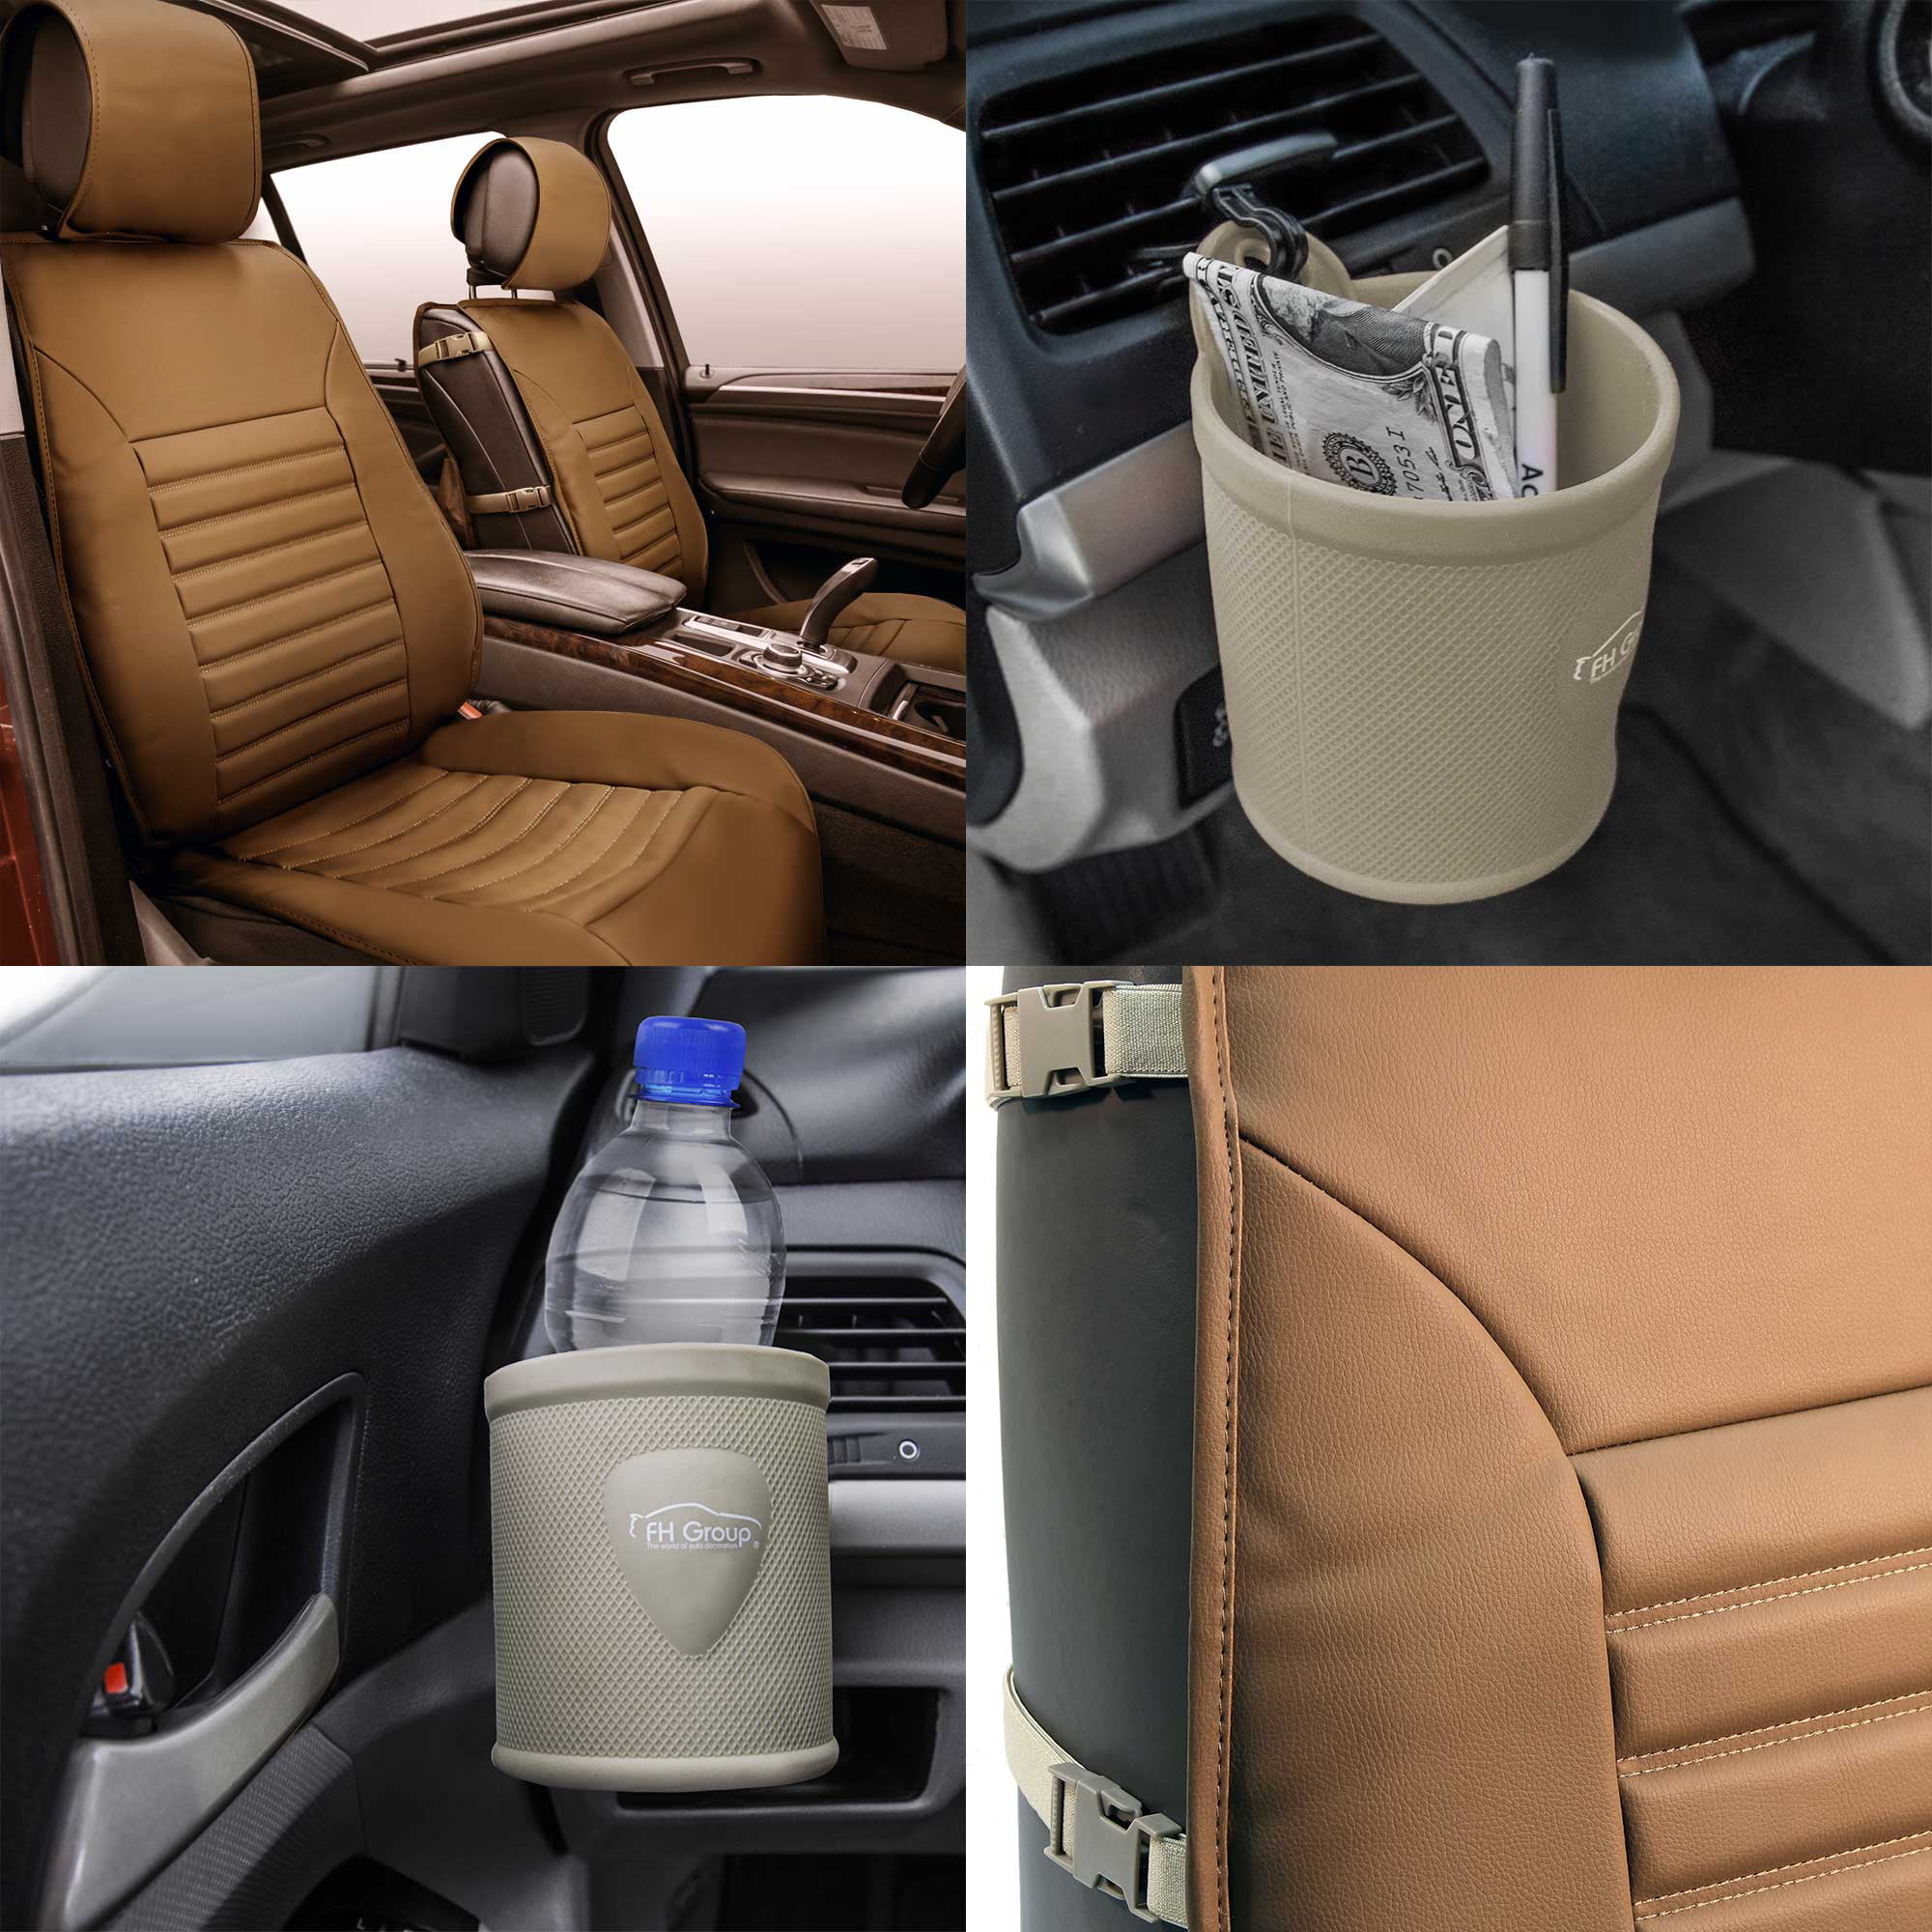 Leather Cushion Car Seat Pad Covers Front Buckets Beige W/ Travel Cup Holder